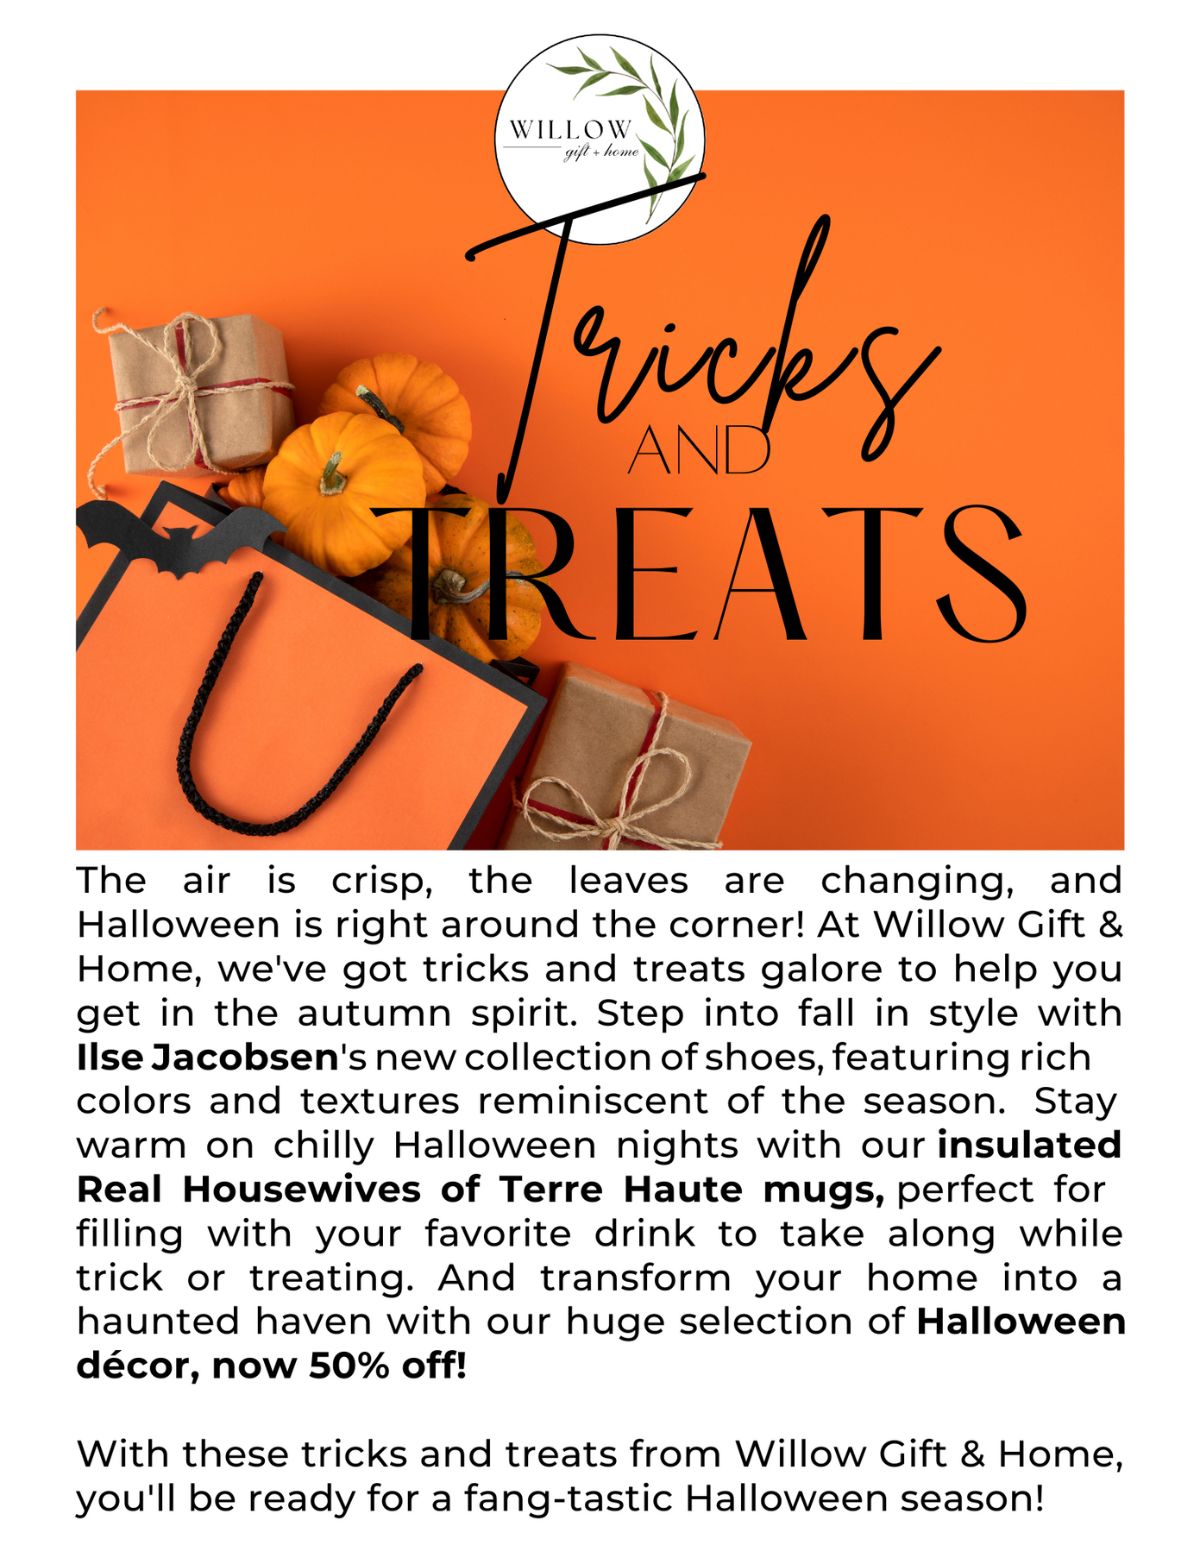 Tricks and Treats at Willow